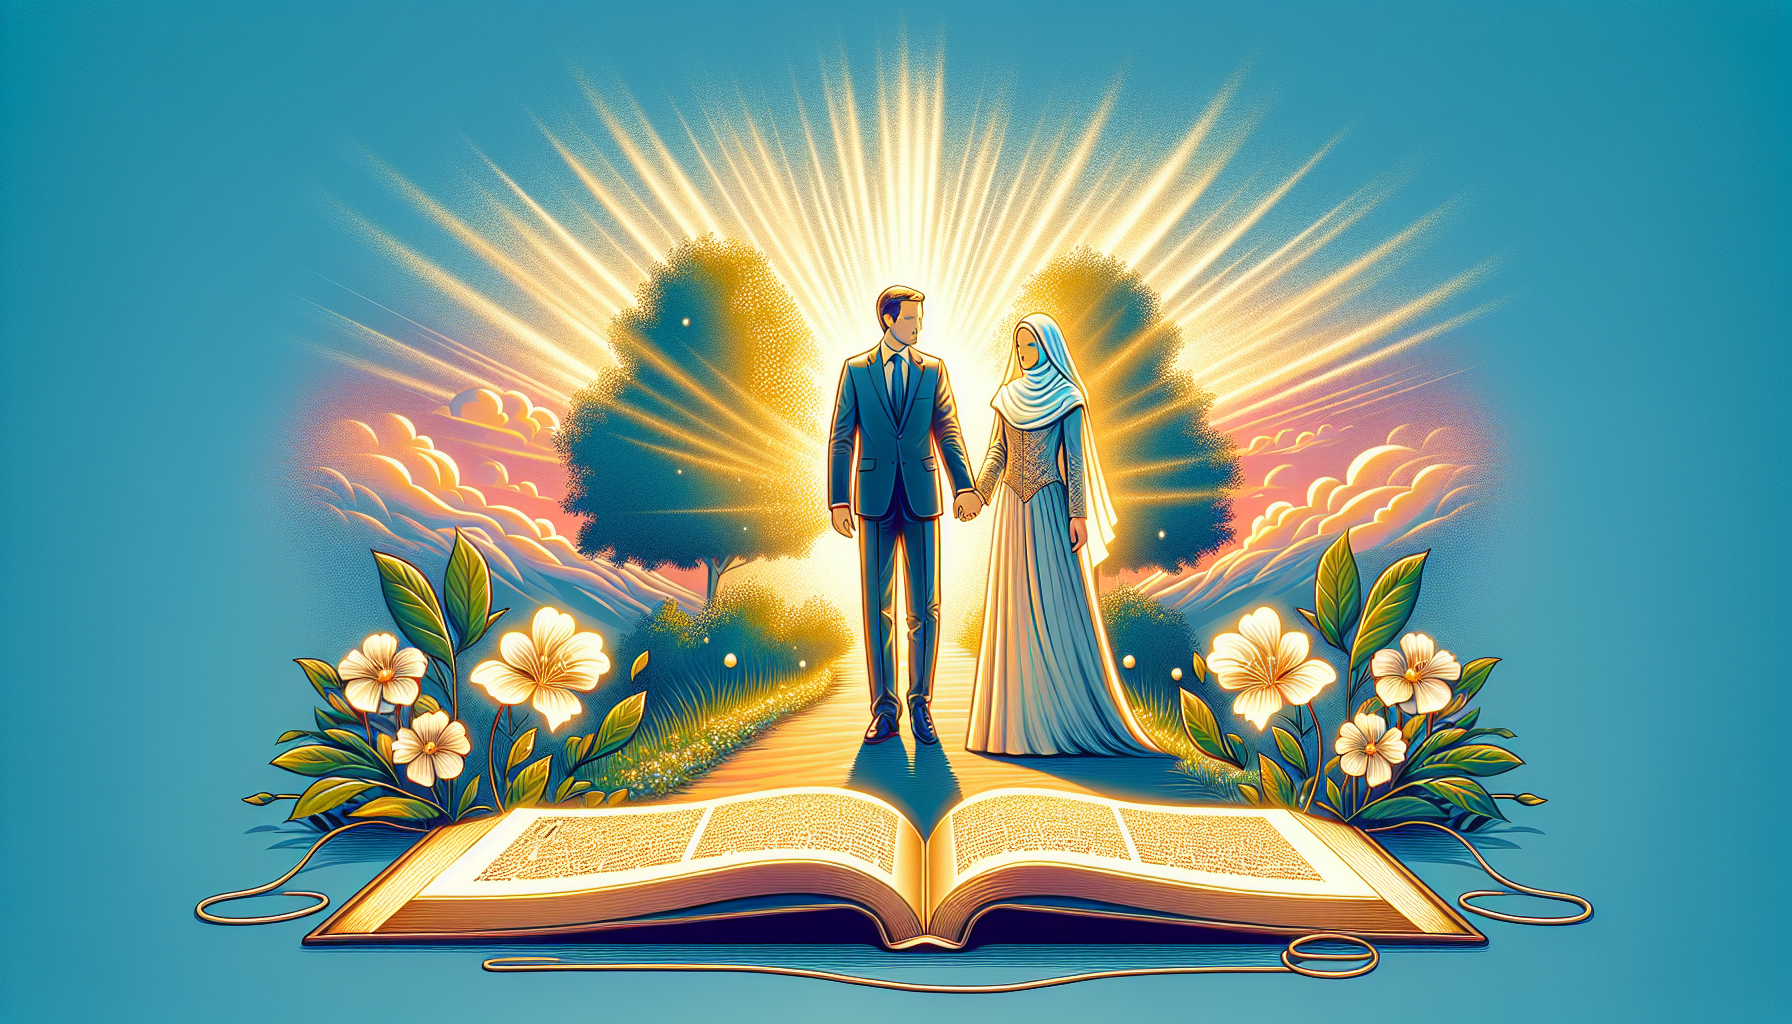 Create an image of a loving Christian couple holding hands, standing in a peaceful, sunlit garden. They are surrounded by open Bibles with highlighted verses glowing softly. Above them, a gentle light